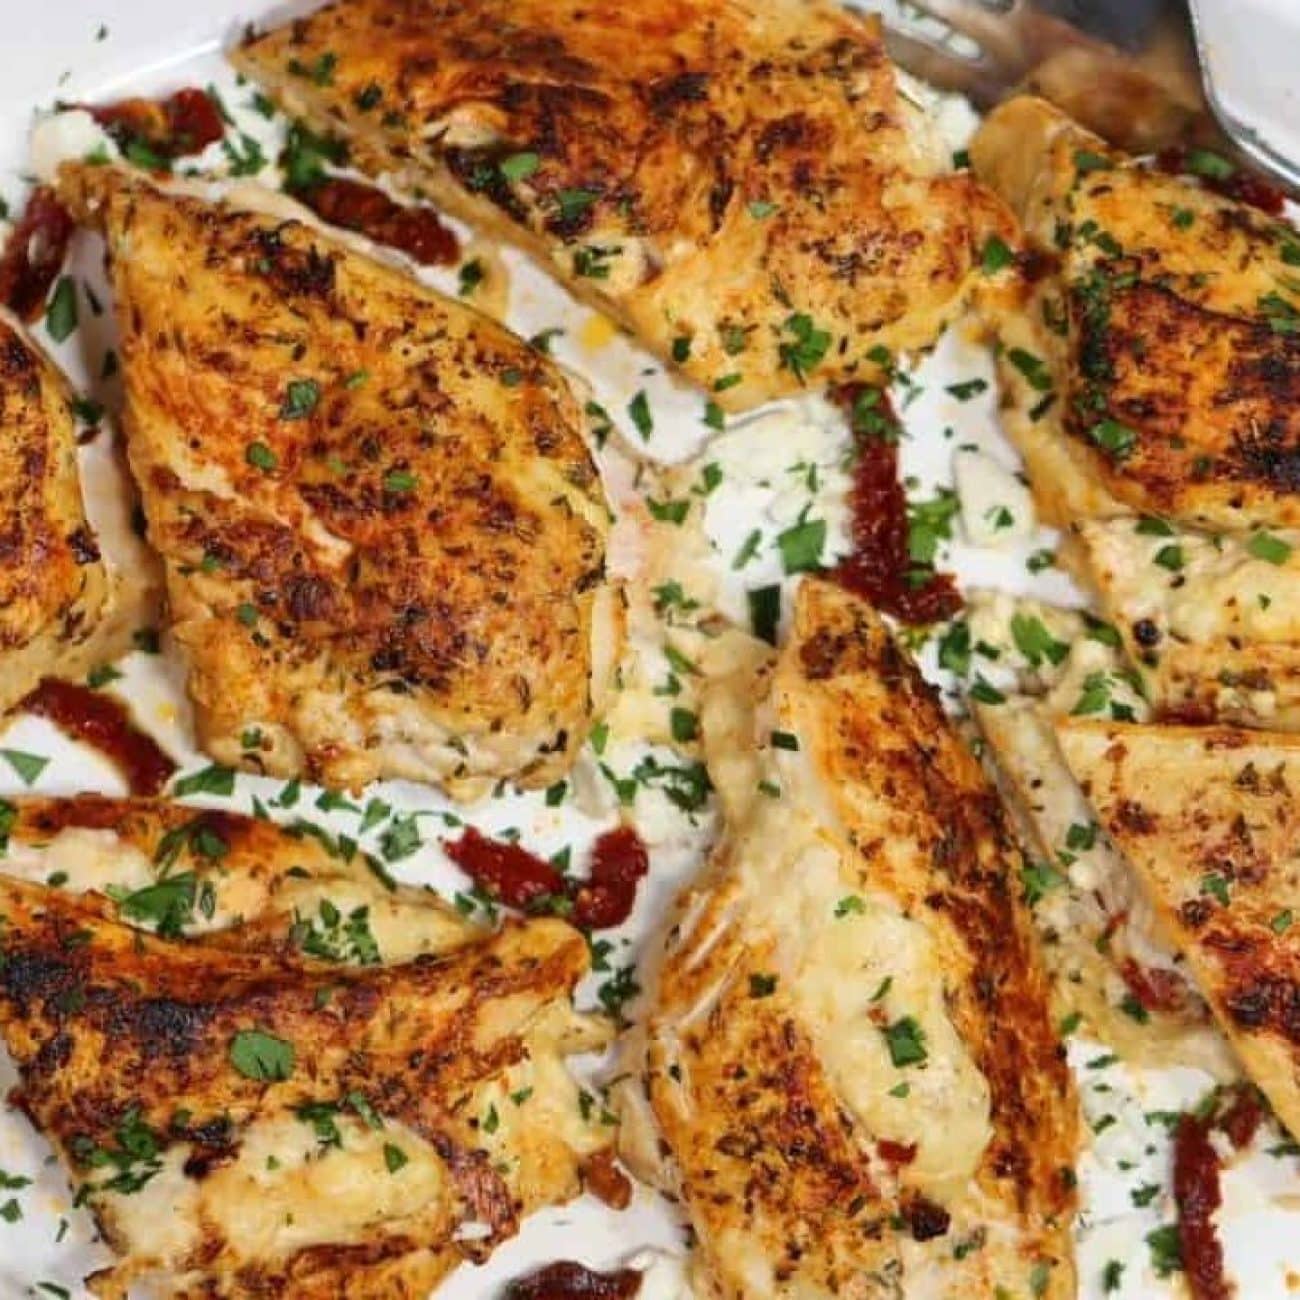 Juicy Chicken Stuffed with Sun-Dried Tomatoes Recipe